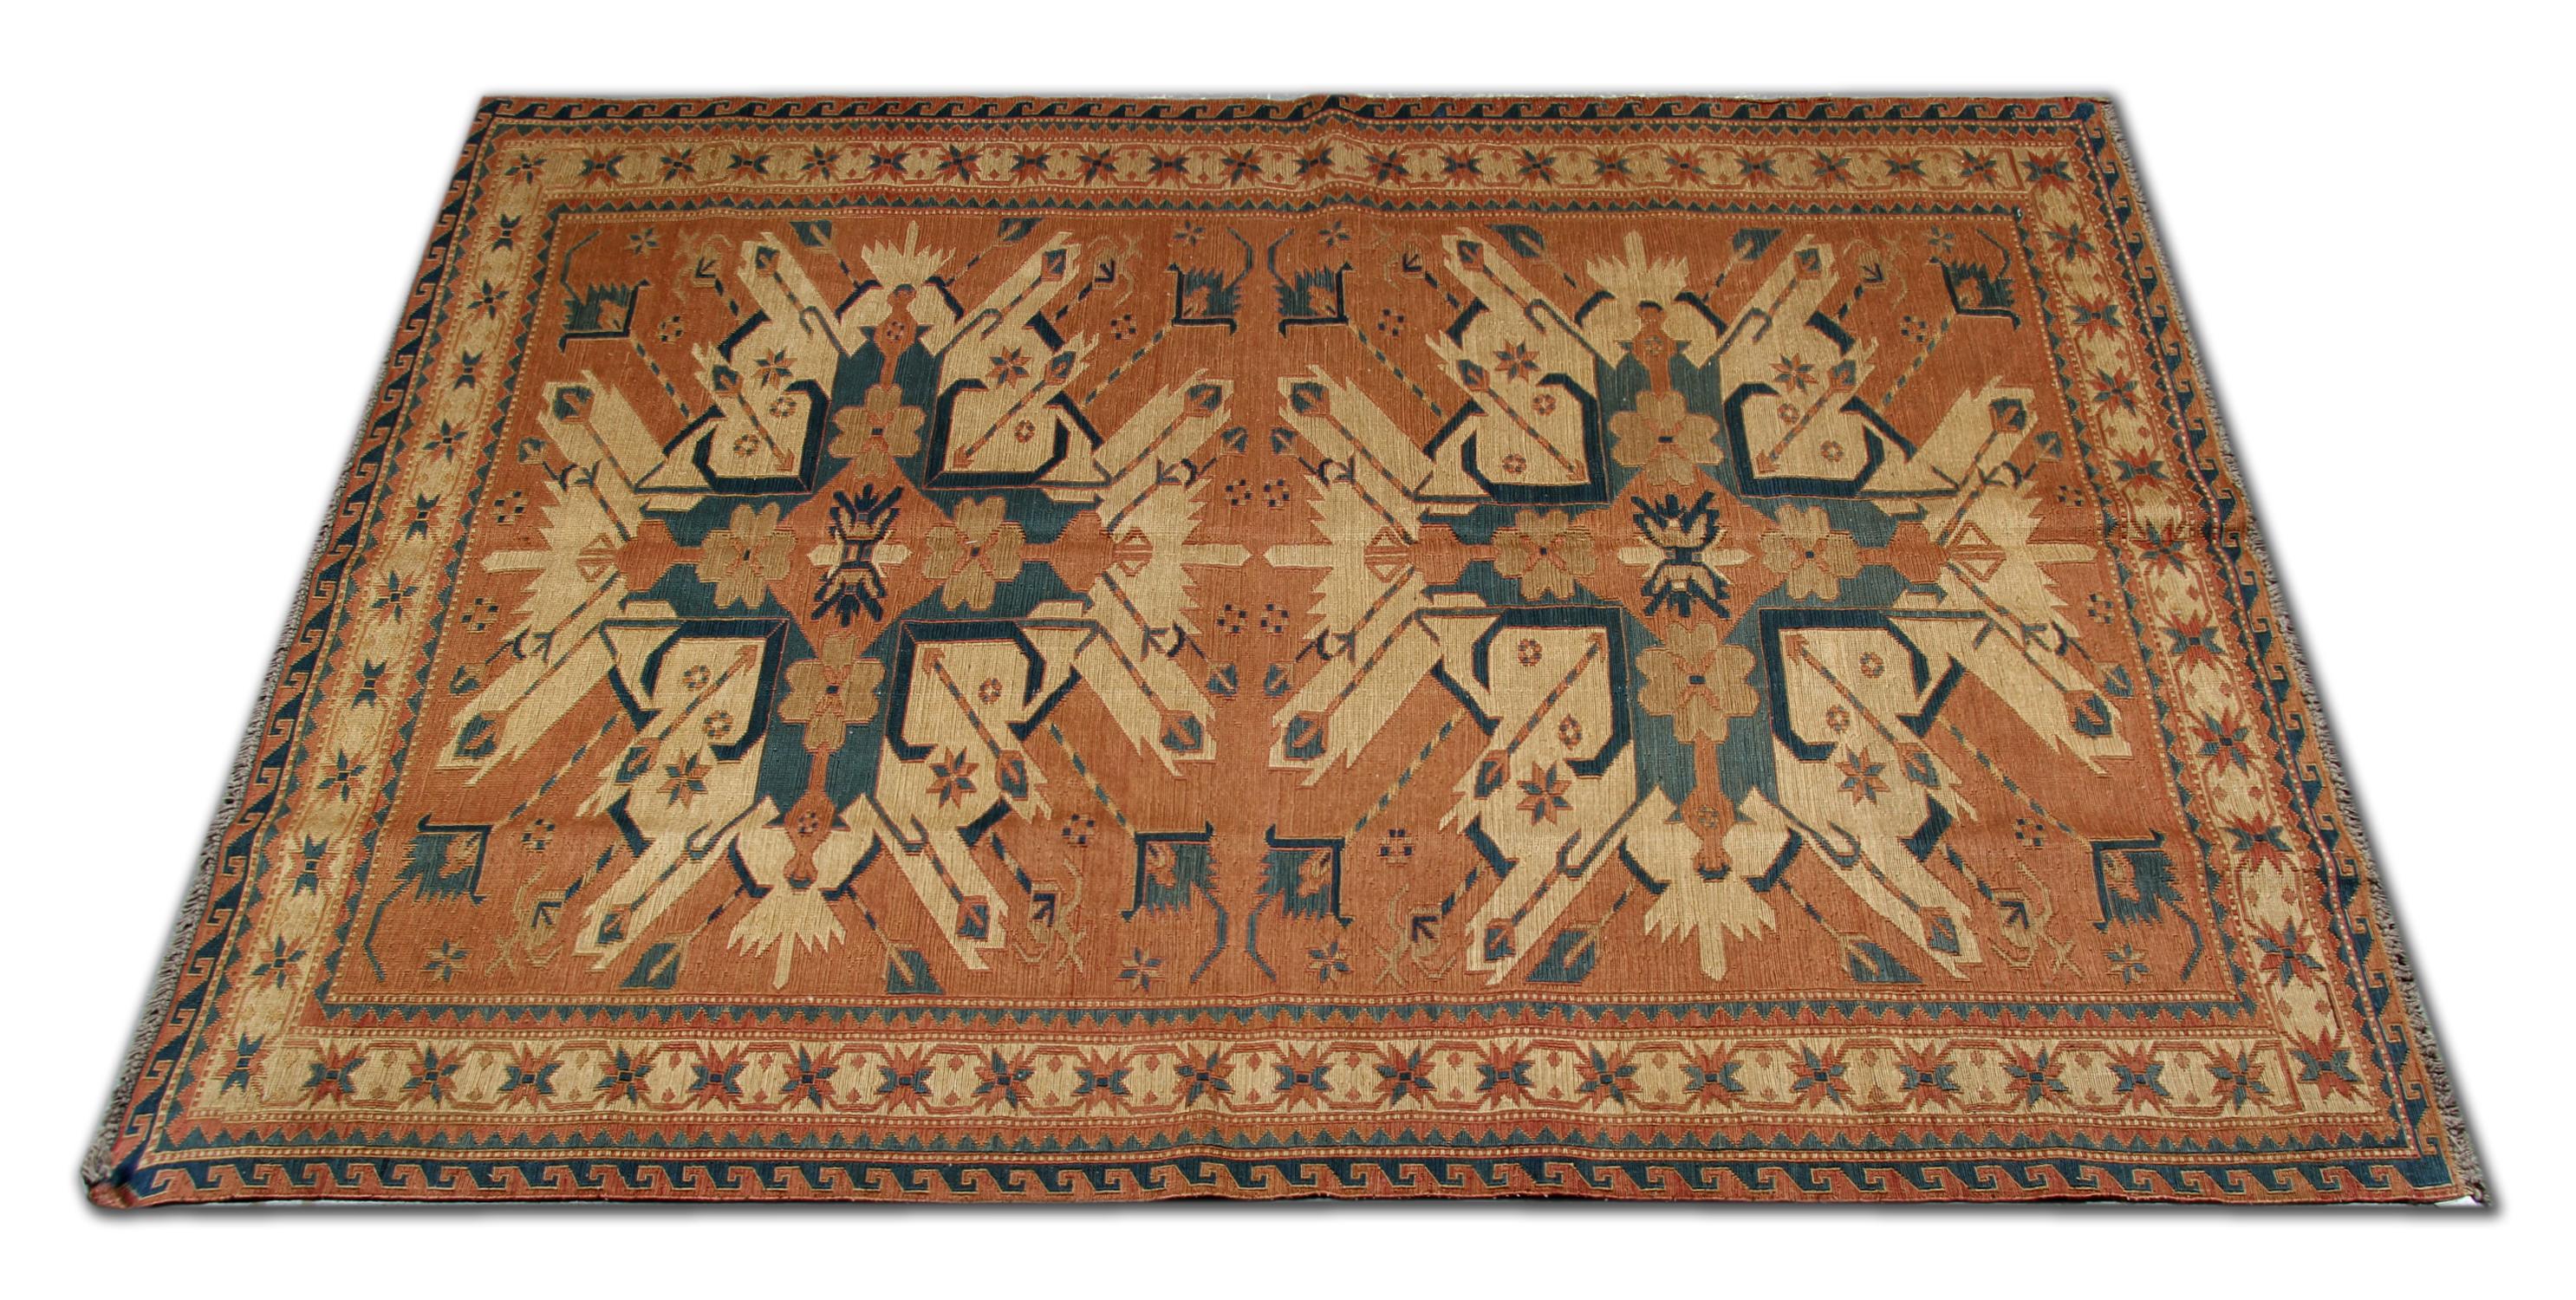 This handwoven wool Sumak rug was constructed in Caucasia in the early 20th century. Featuring a fantastic double medallion design woven in cream, rust and blue on a rusty cream background. Woven with a great level of detail, with medallions and